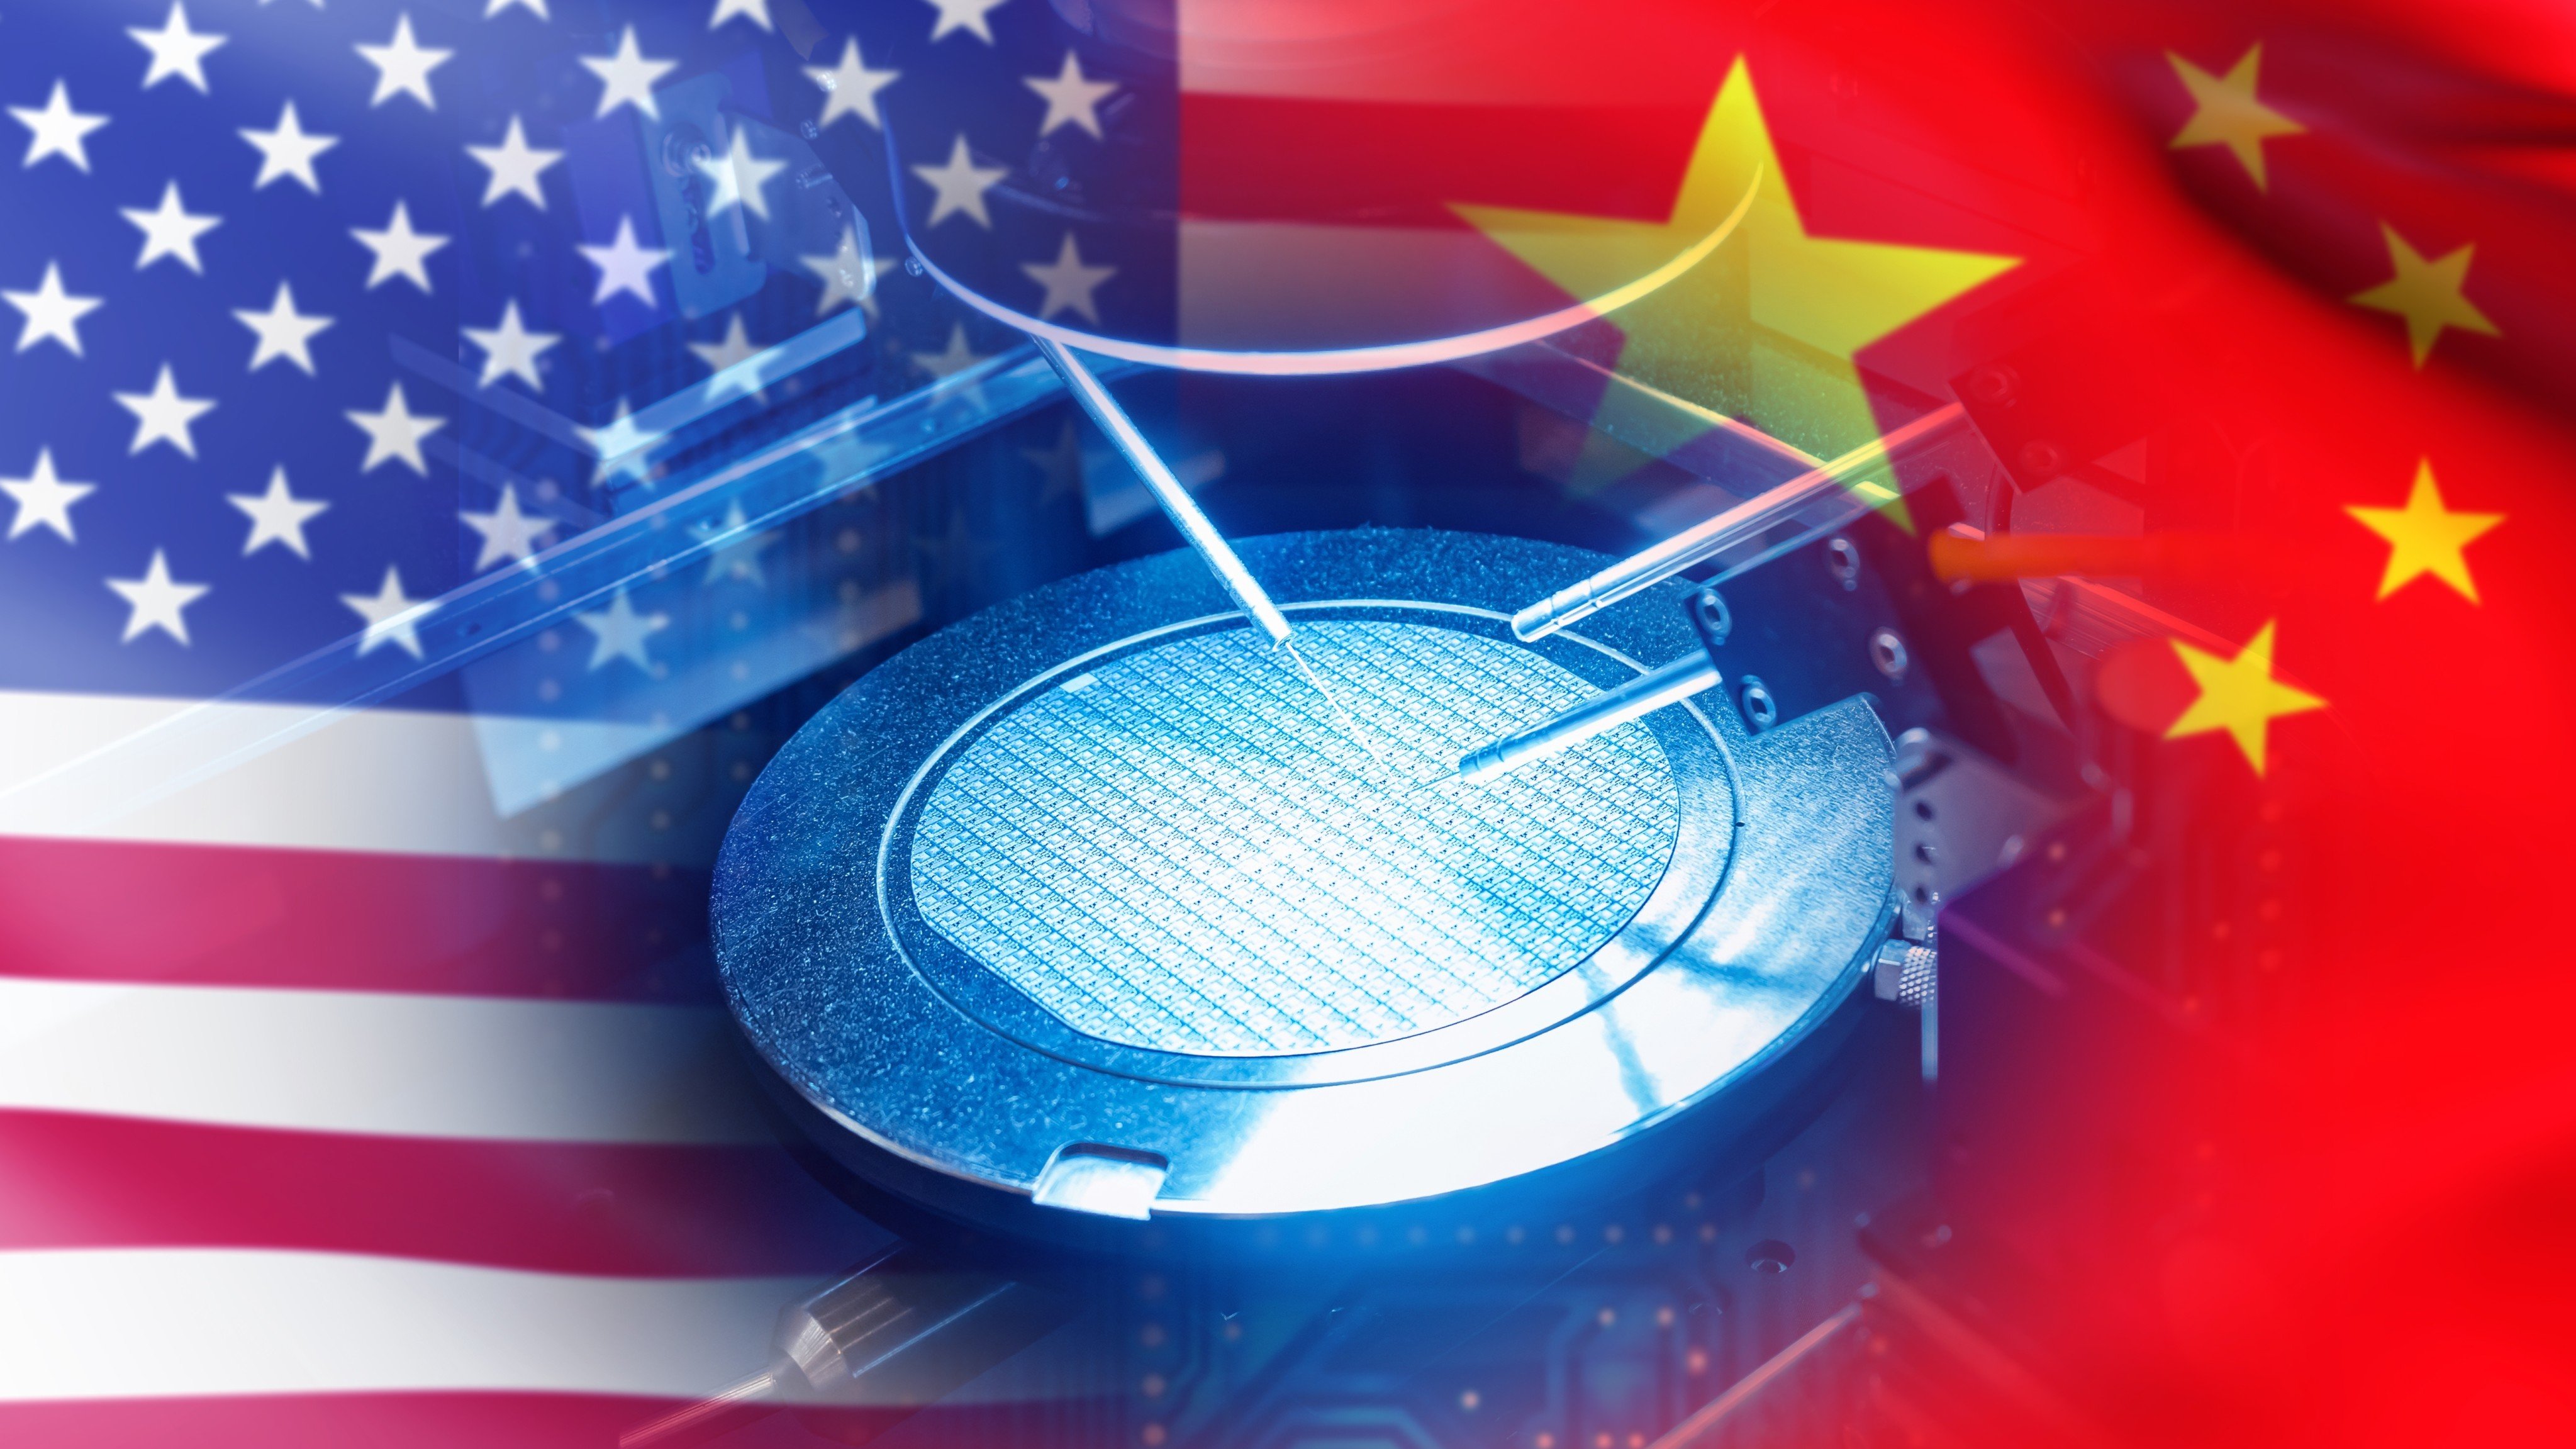 Chinese commerce minister Wang Wentao focused on expressing “serious concerns” over US sanctions that “suppress” Chinese companies, particularly the restrictions on third-party exports of lithography machines. Photo: Shutterstock